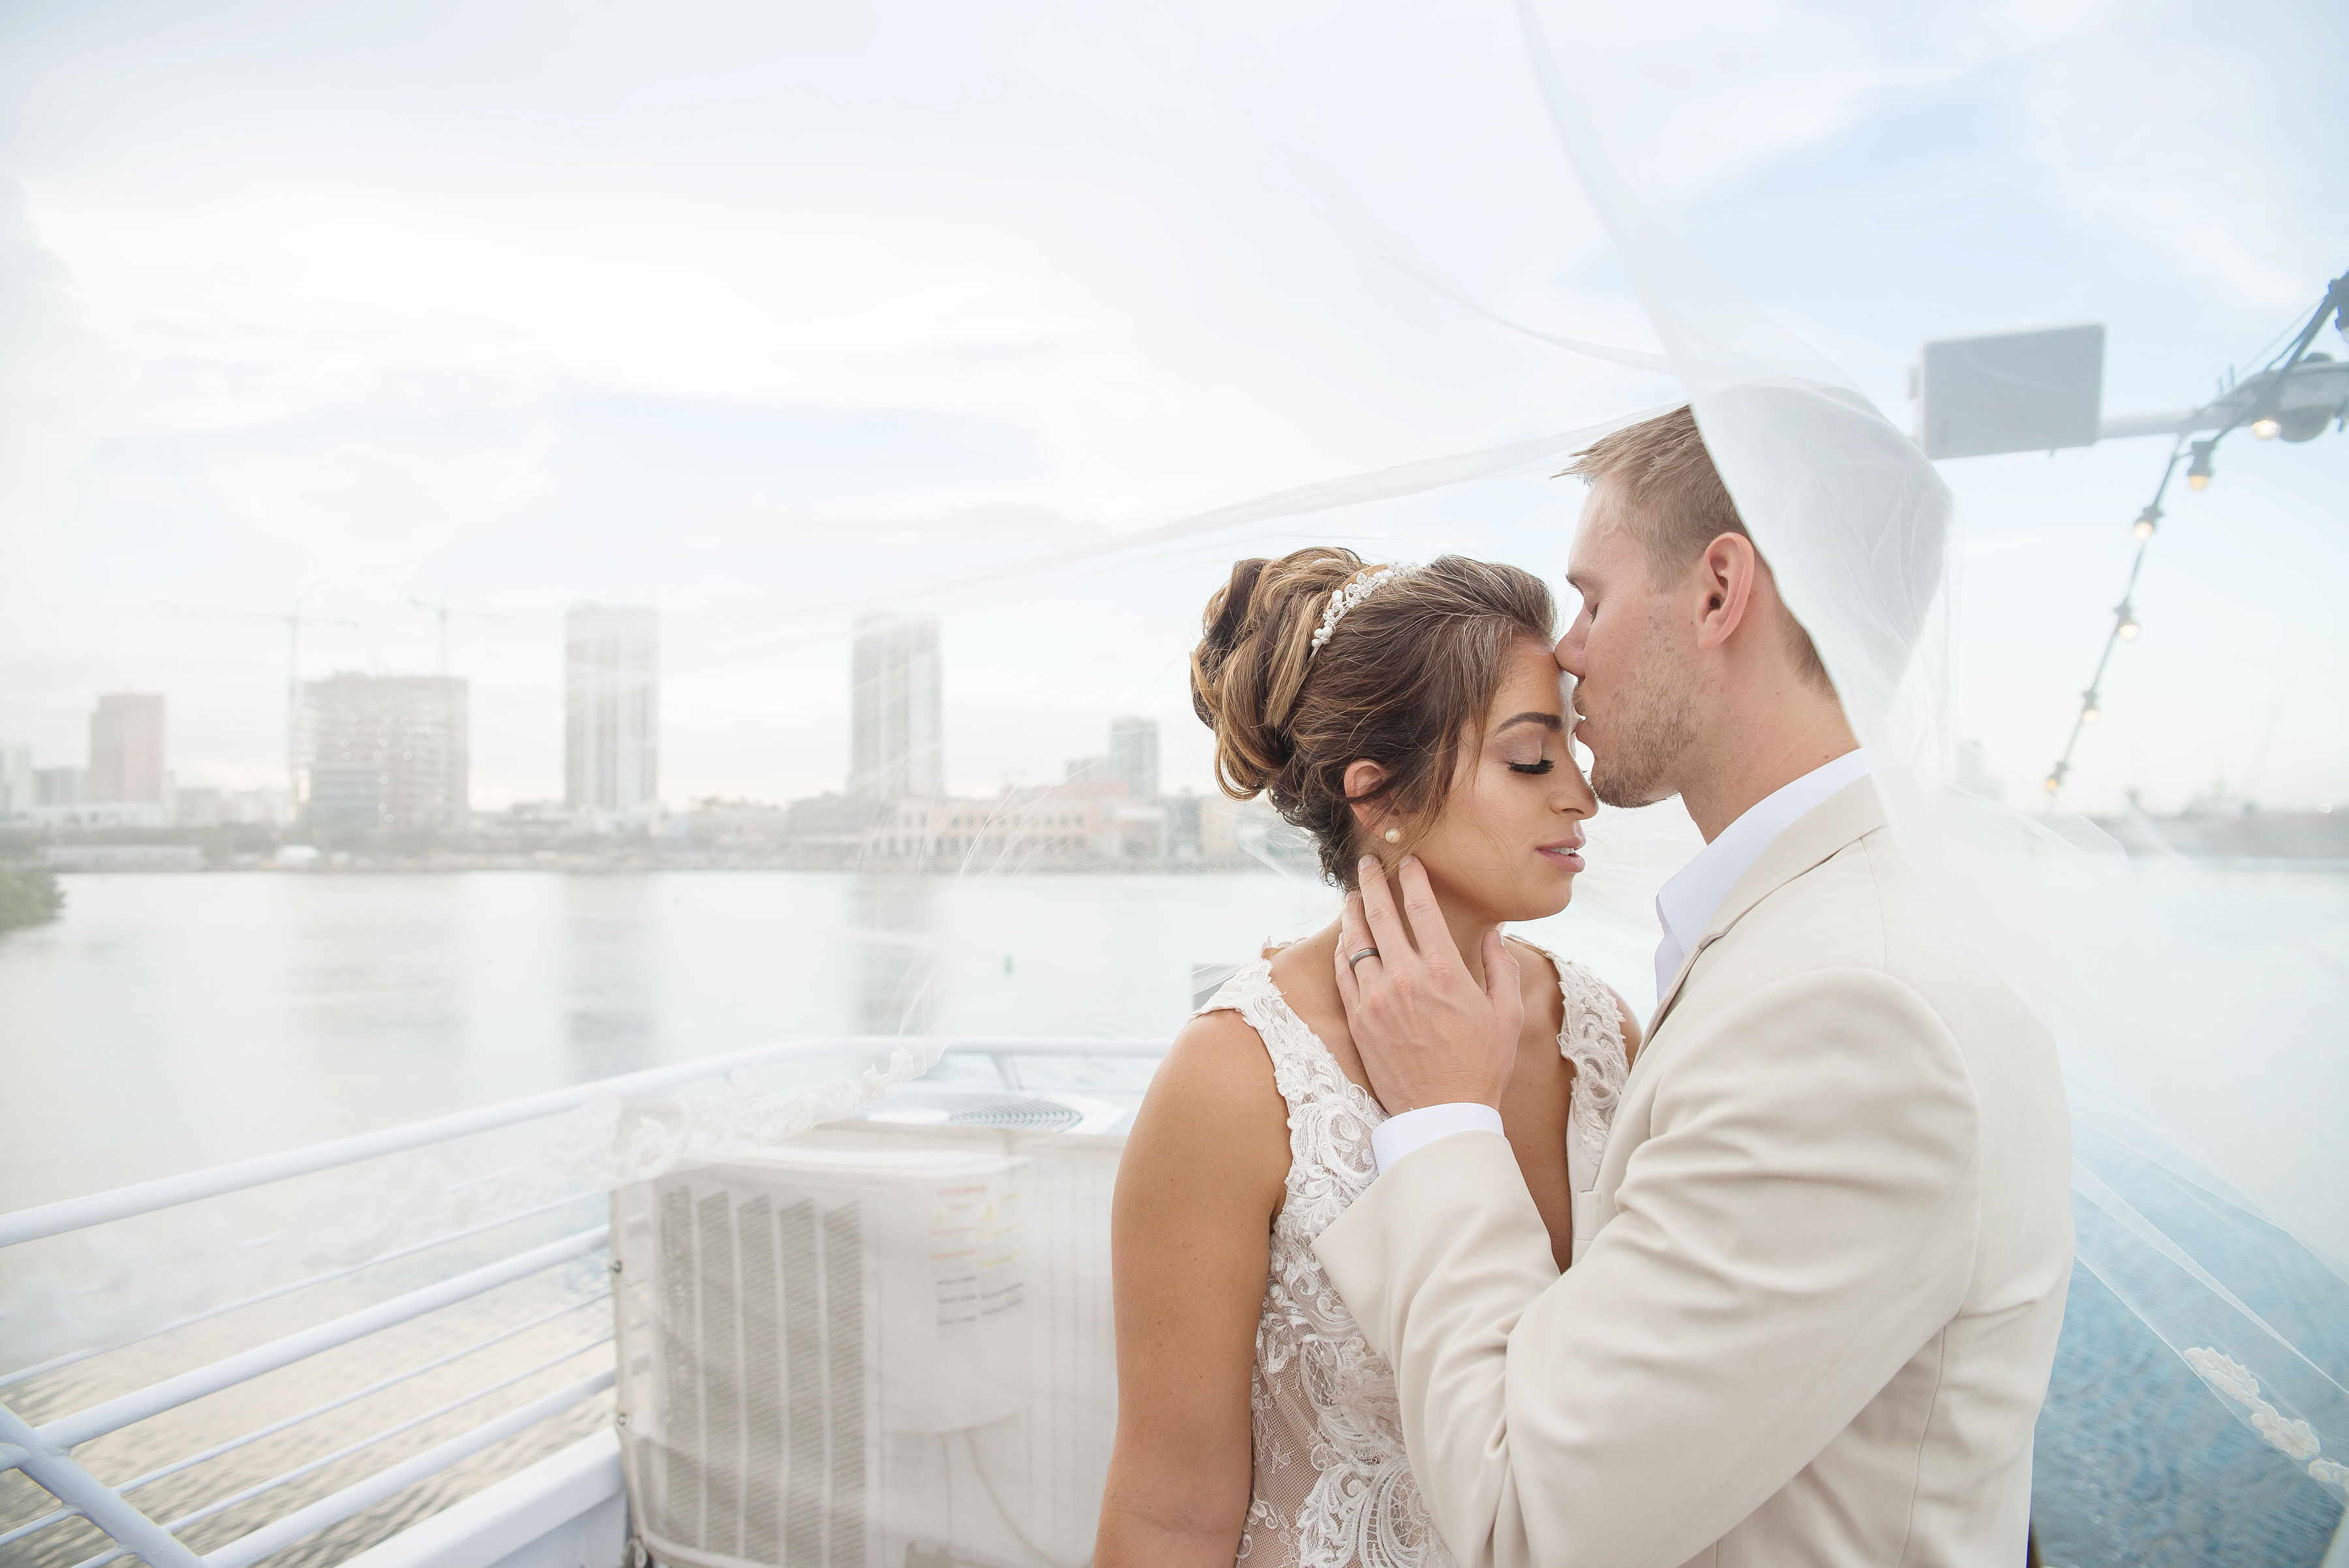 Creative Florida Bride and Groom Under Veil Wedding Portrait on Deck of Yacht | Tampa Bay Wedding Photographer Kristen Marie Photography | Tampa Waterfront Venue Yacht Starship II | Wedding Dress and Veil Nikki's Glitz and Glam Boutique | Menswear Sacinos Formalwear | Hair and Makeup Destiny and Light Hair and Makeup Group